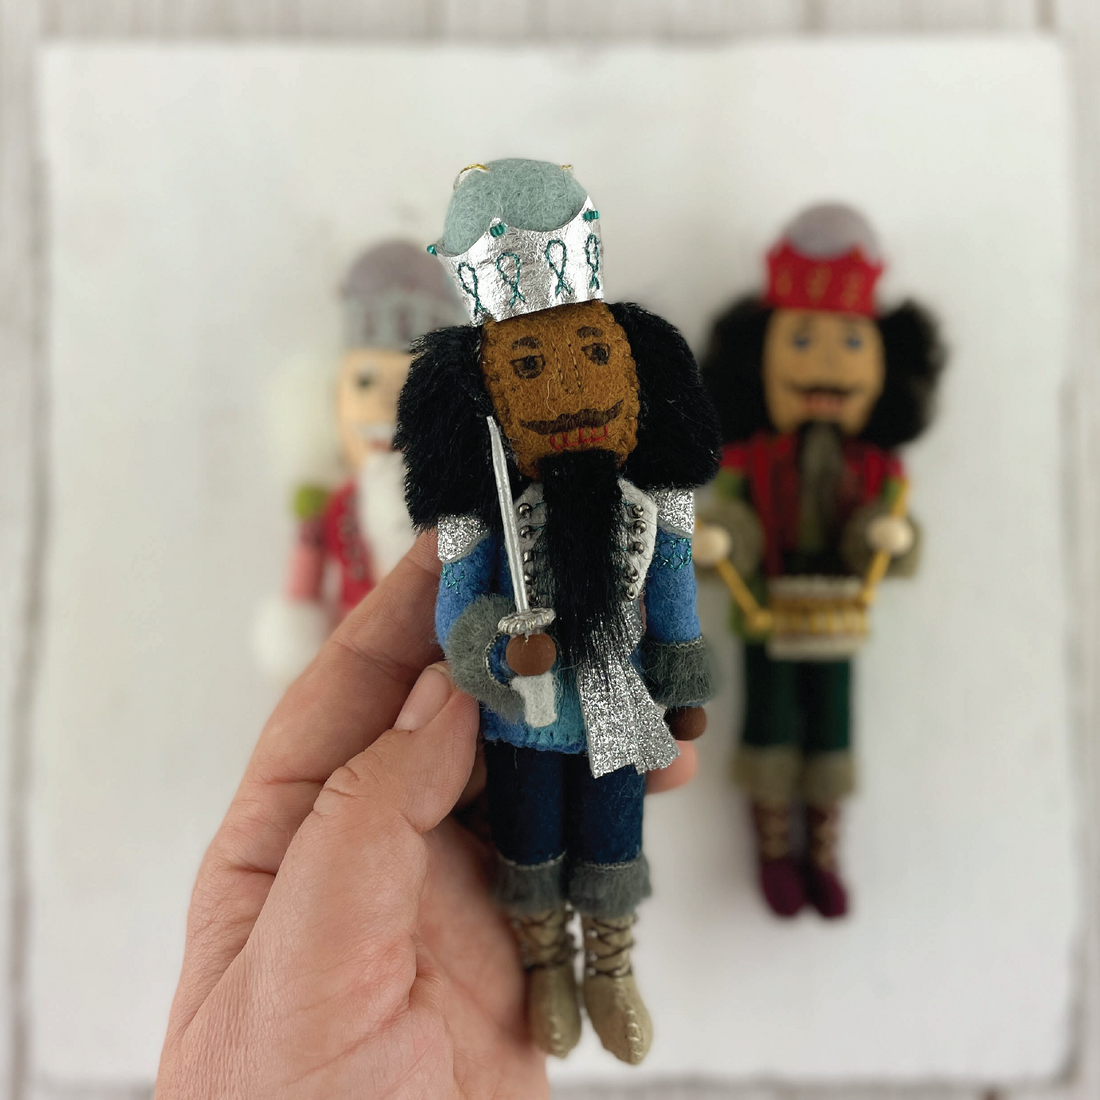 Nathan the Nutcracker Embroidery and Hand Sewing Pattern